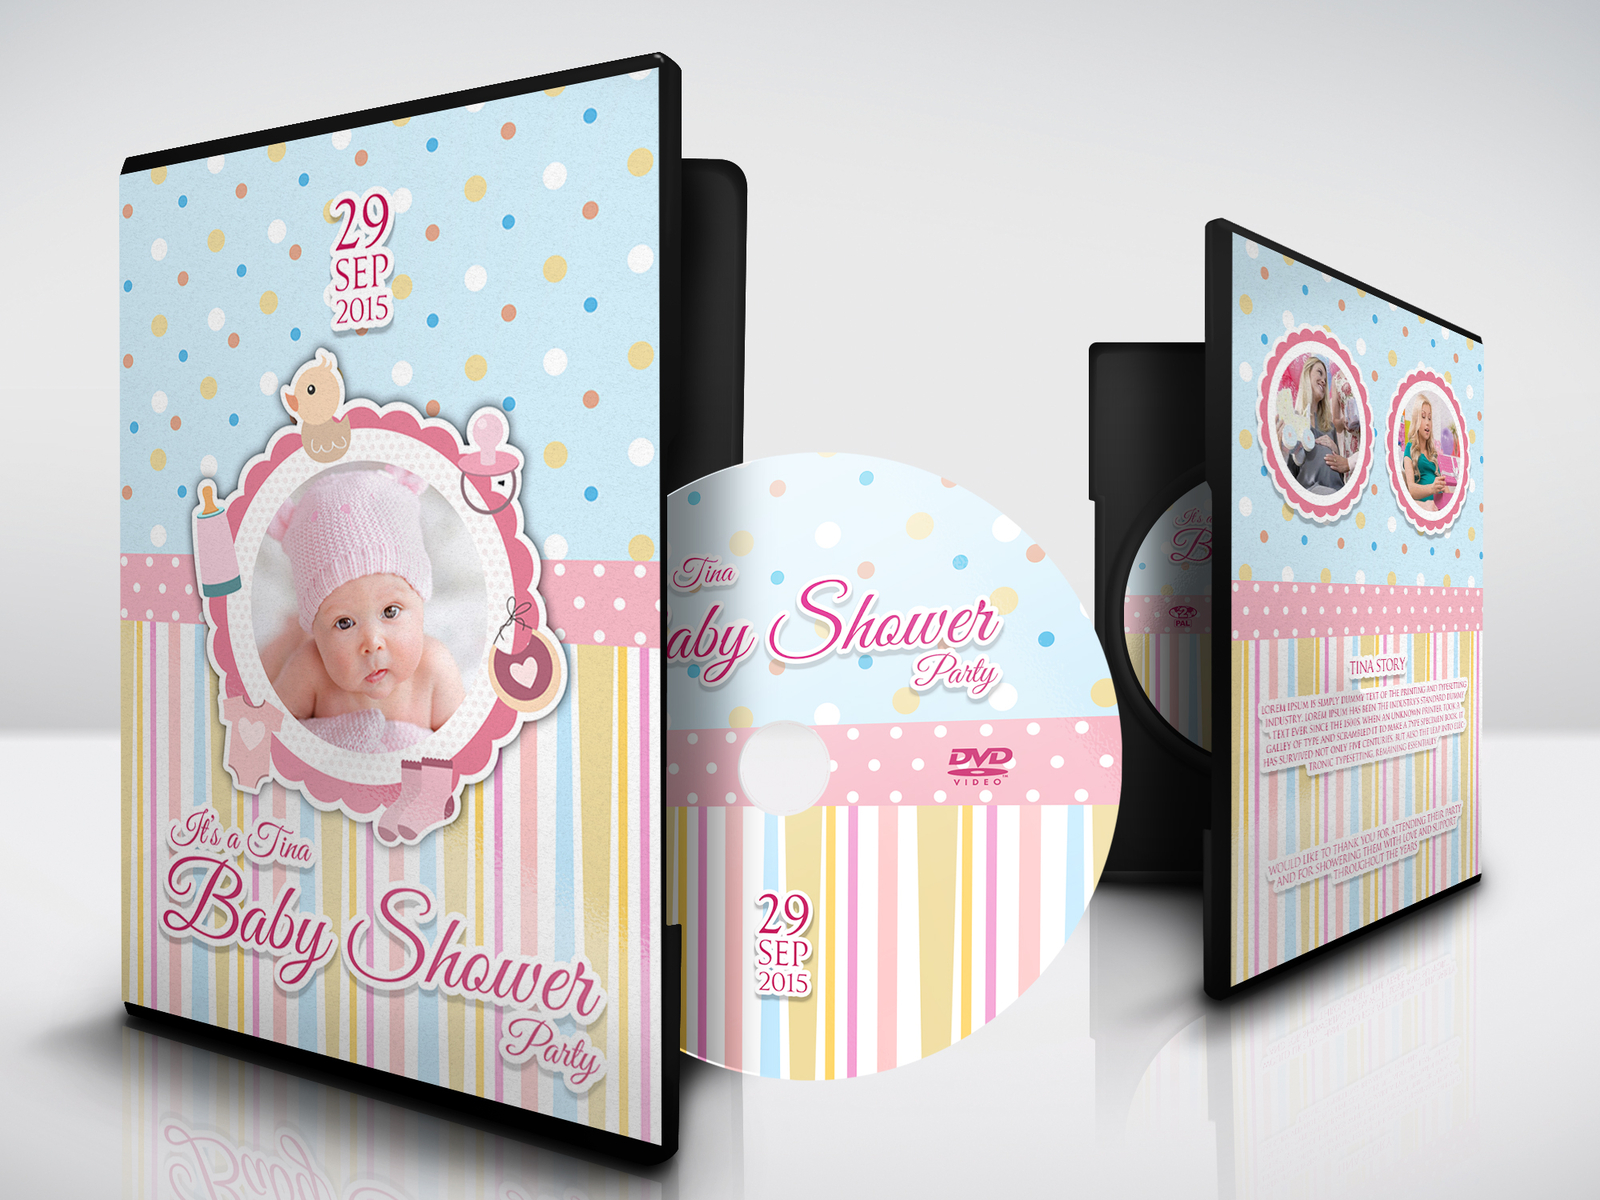 Baby Shower Party Dvd Cover Template by OWPictures on Dribbble